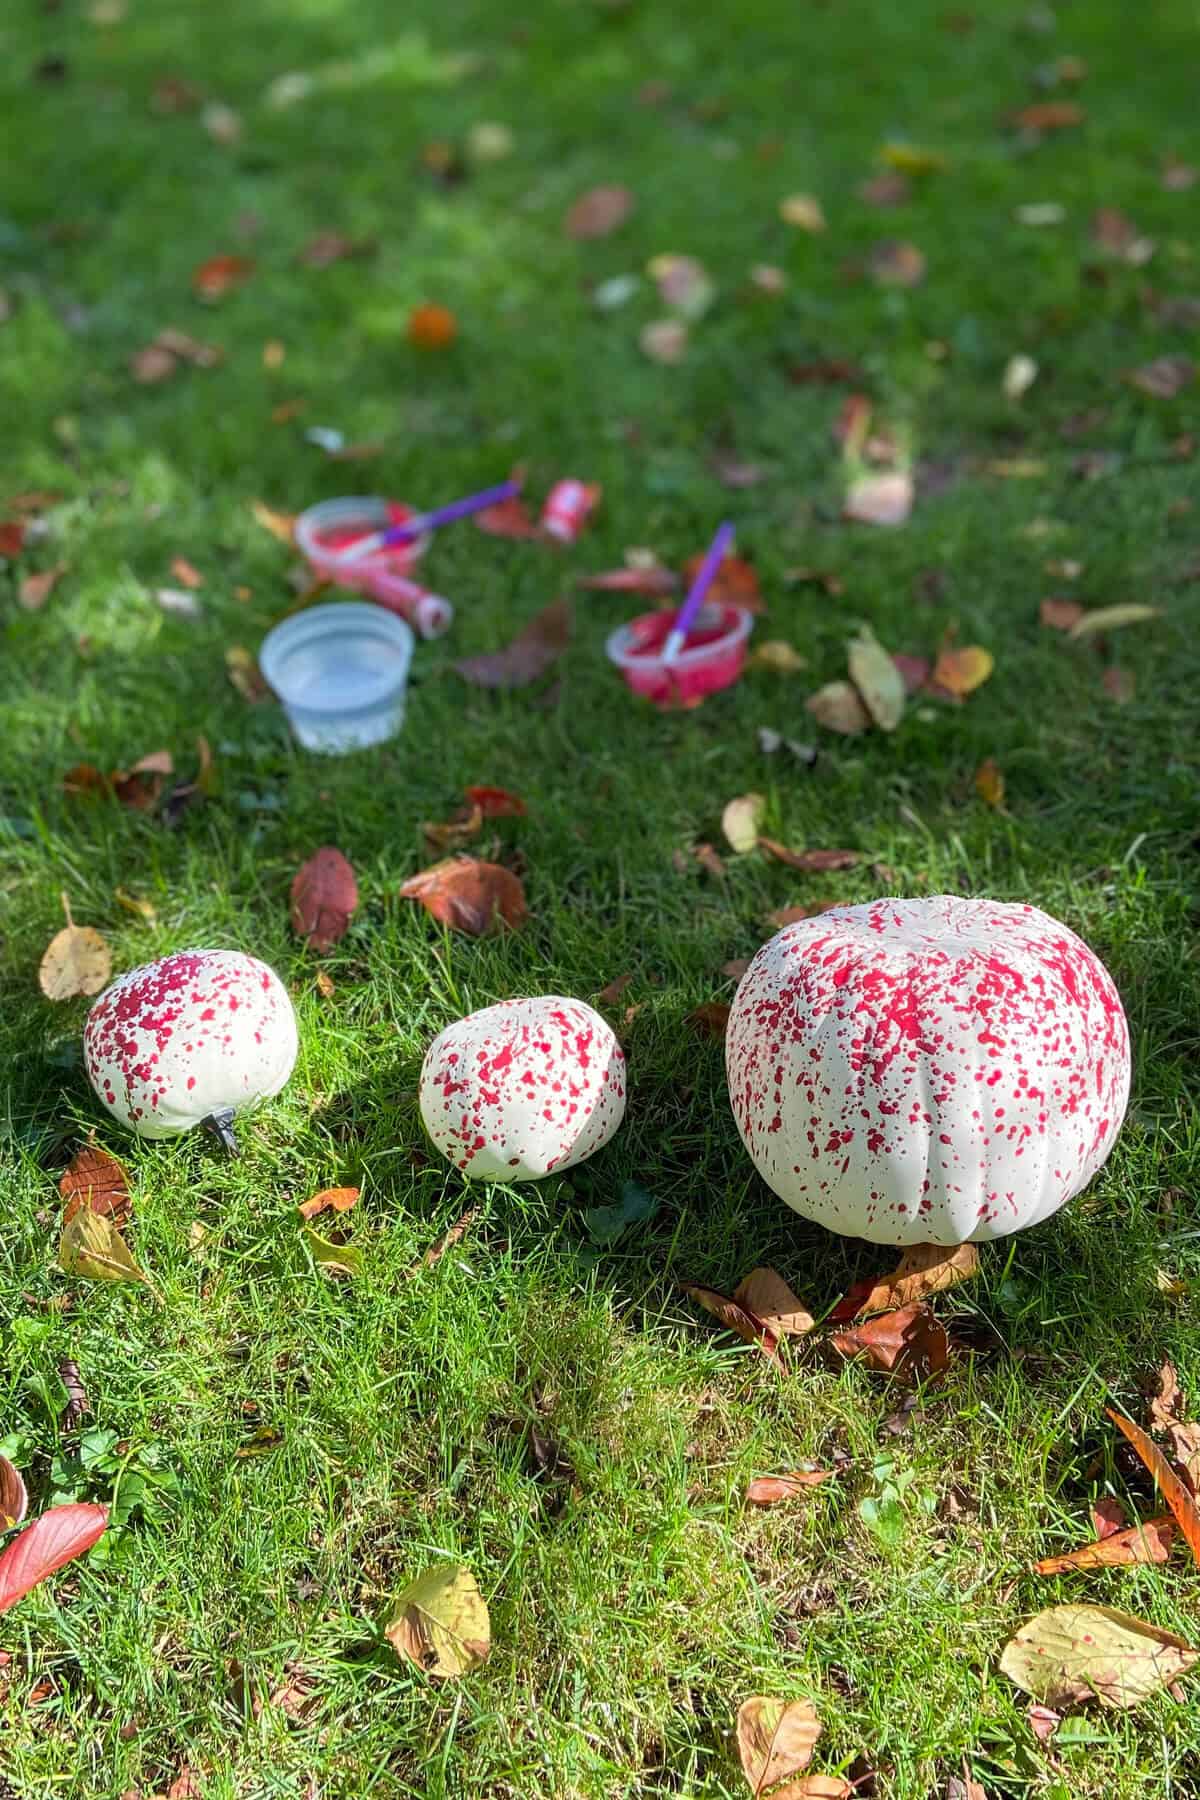 Painting pumpkins in the grass.